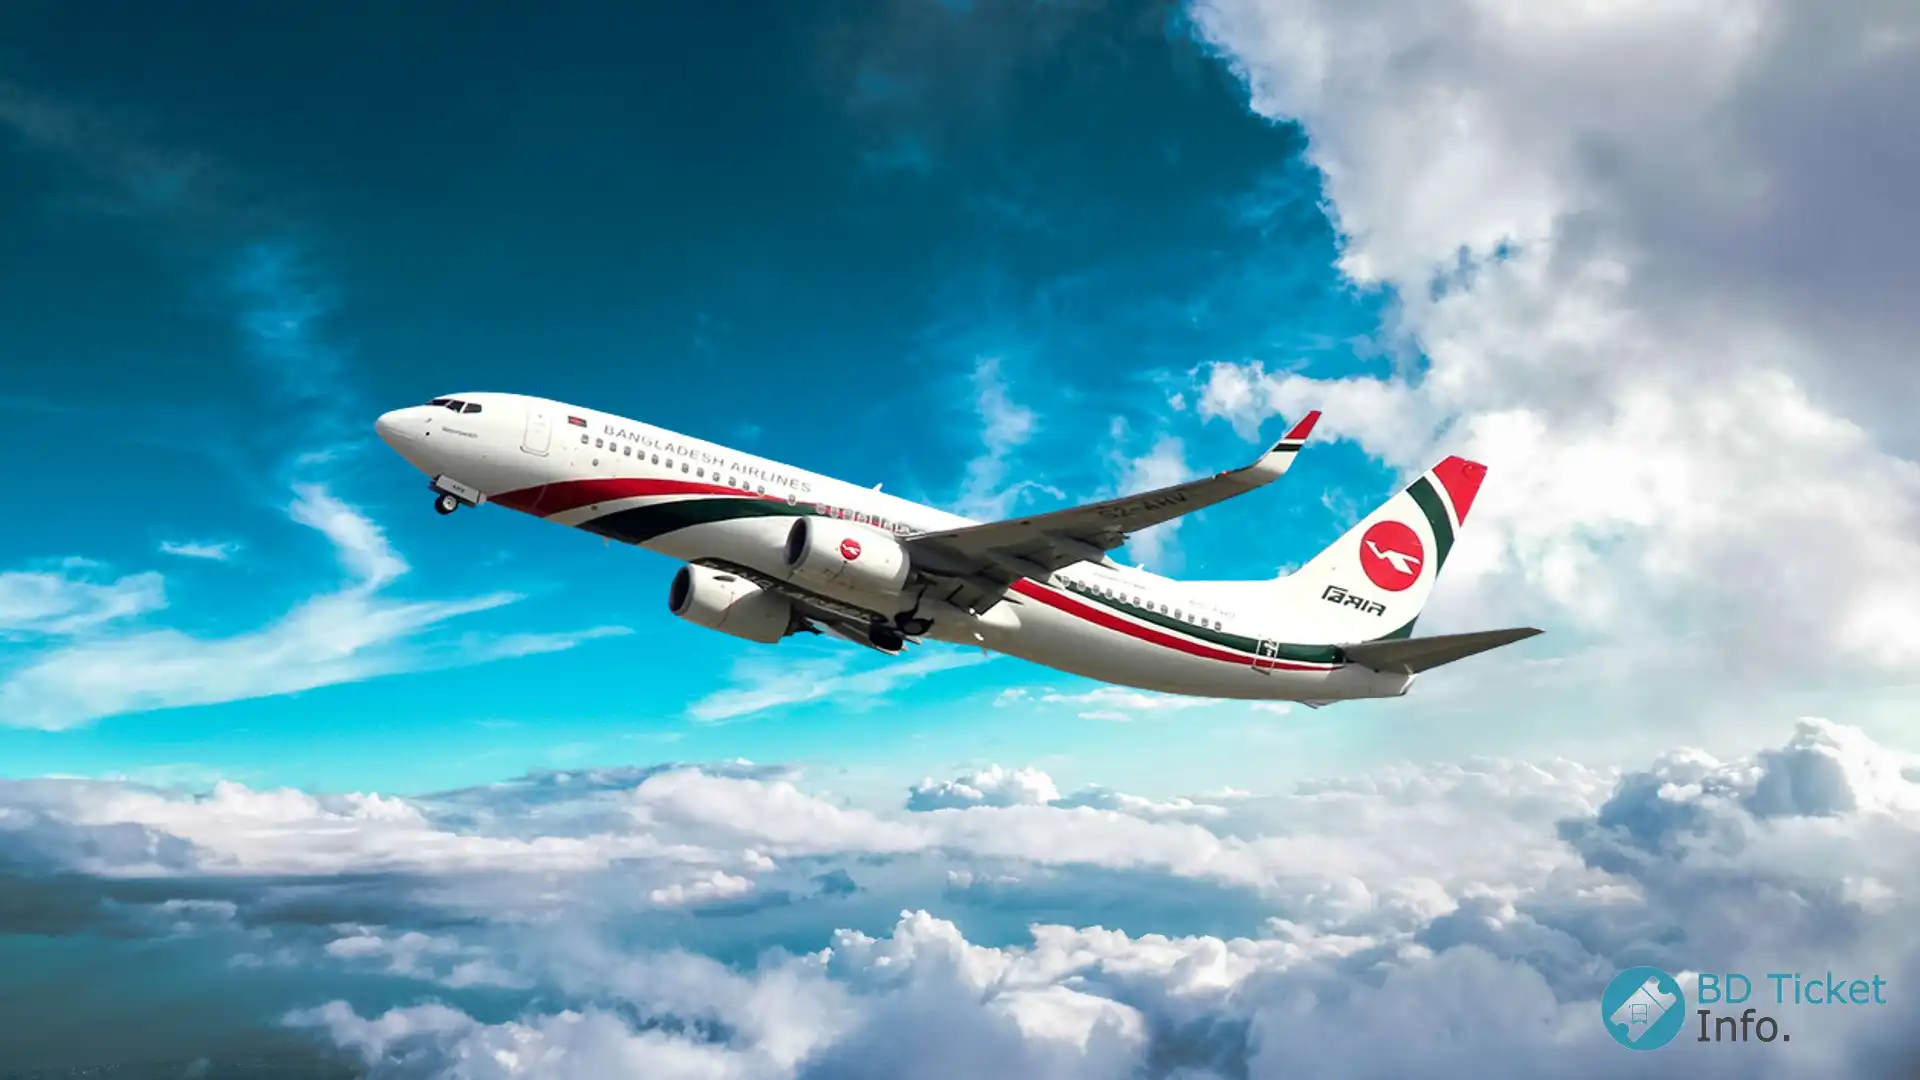 Biman Bangladesh Airlines Office Address, Contact Number, Ticketing